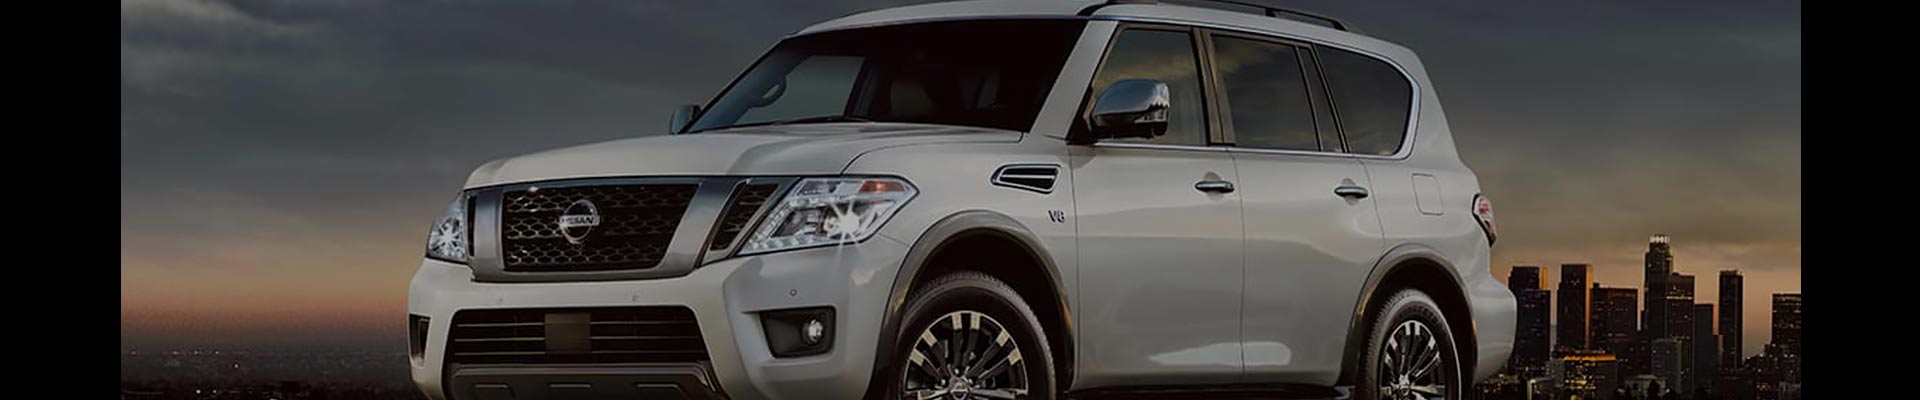 Shop Replacement and OEM 2017 Nissan Armada Parts with Discounted Price on the Net